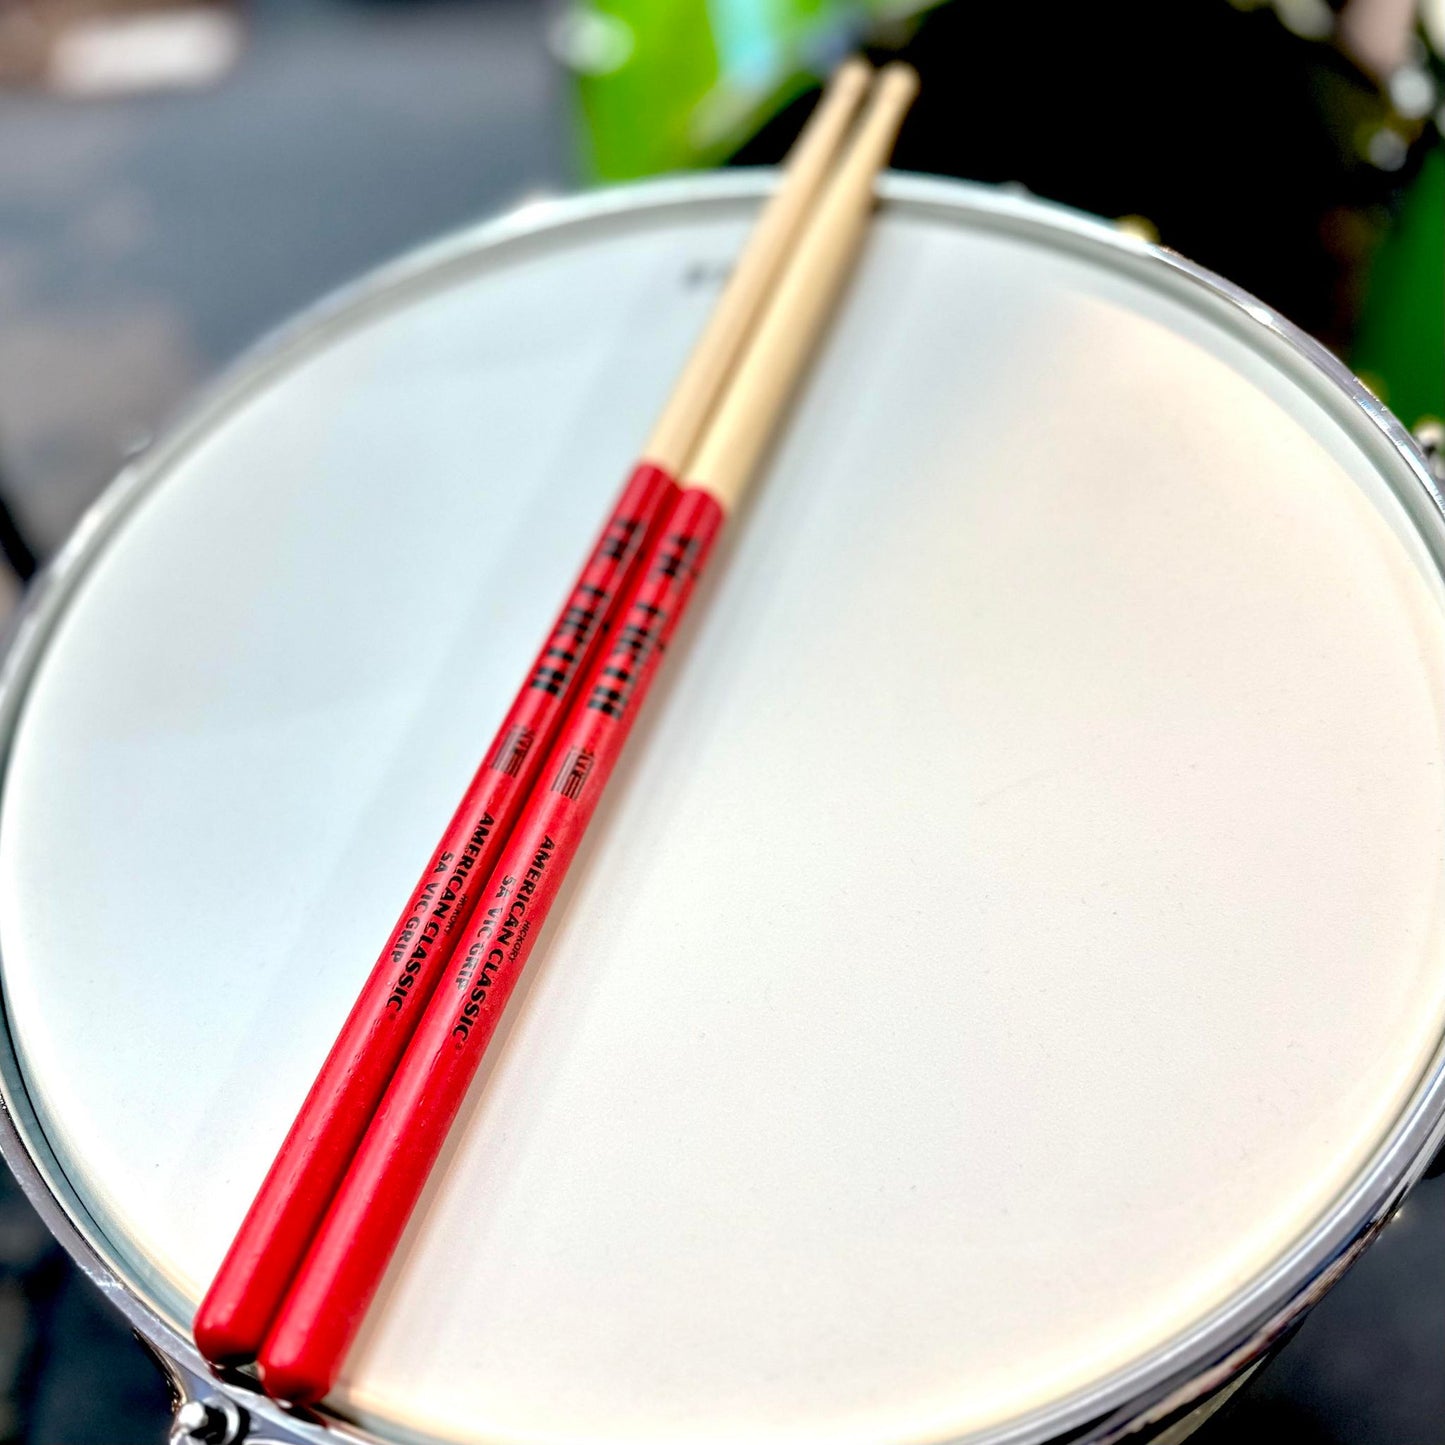 Vic Firth Drumsticks Extreme Grip